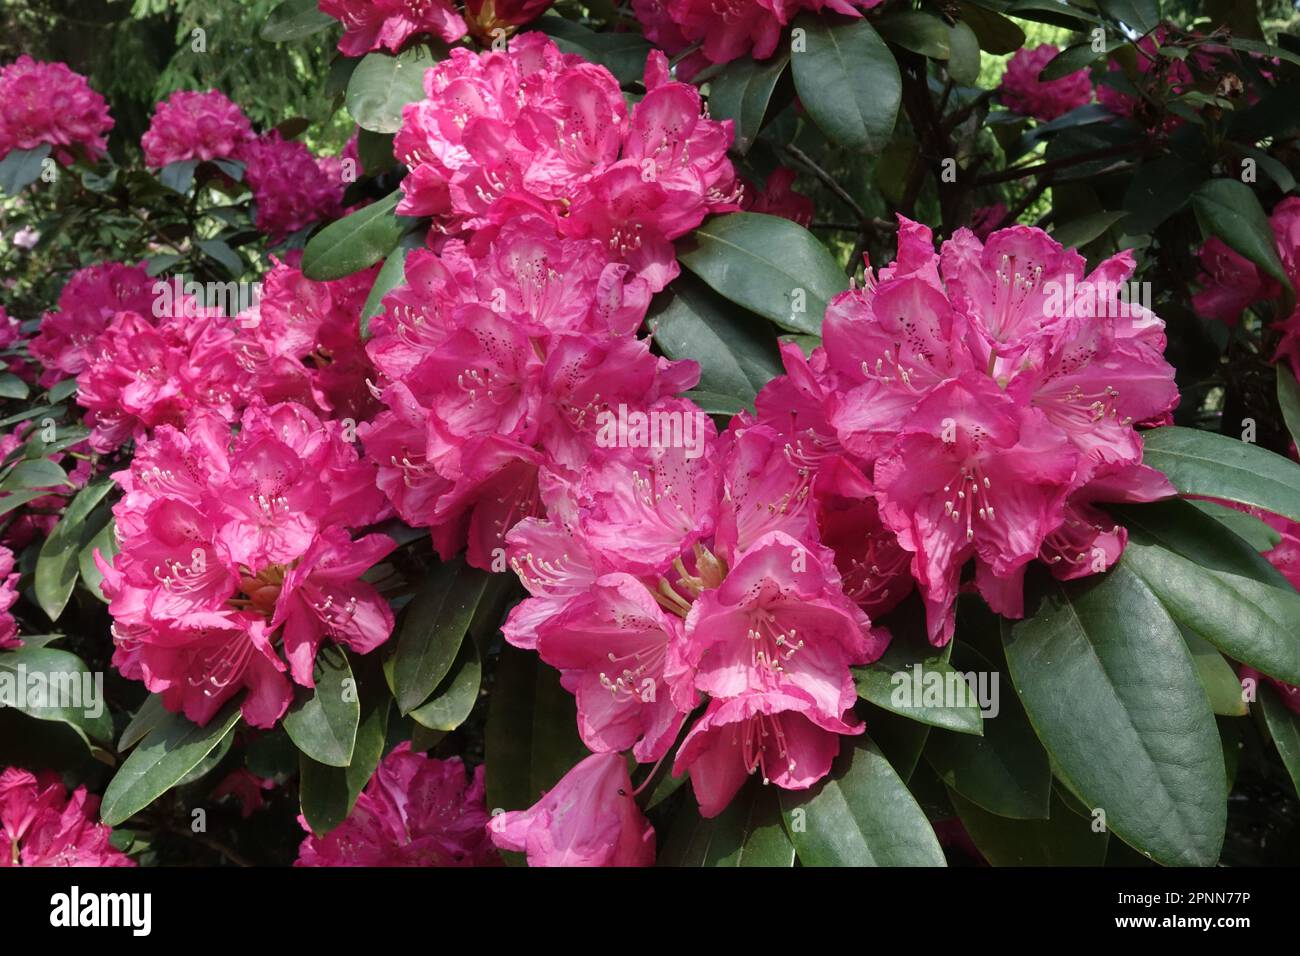 Flowering Rhododendron 'Pelopidas', Rose Colour, Bloom Stock Photo